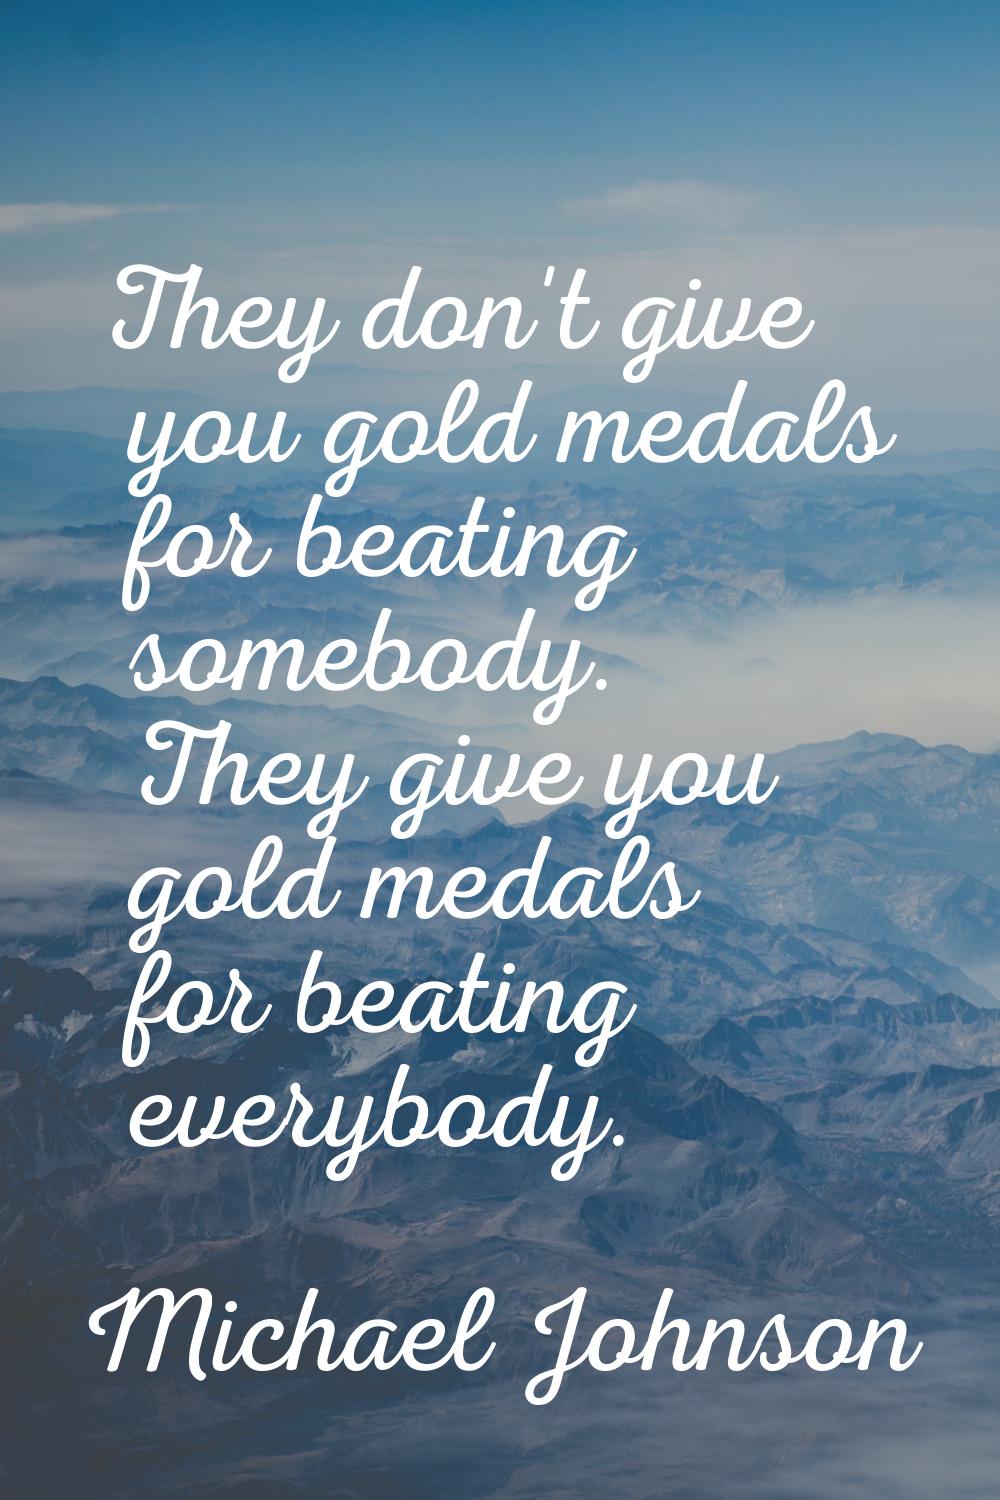 They don't give you gold medals for beating somebody. They give you gold medals for beating everybo